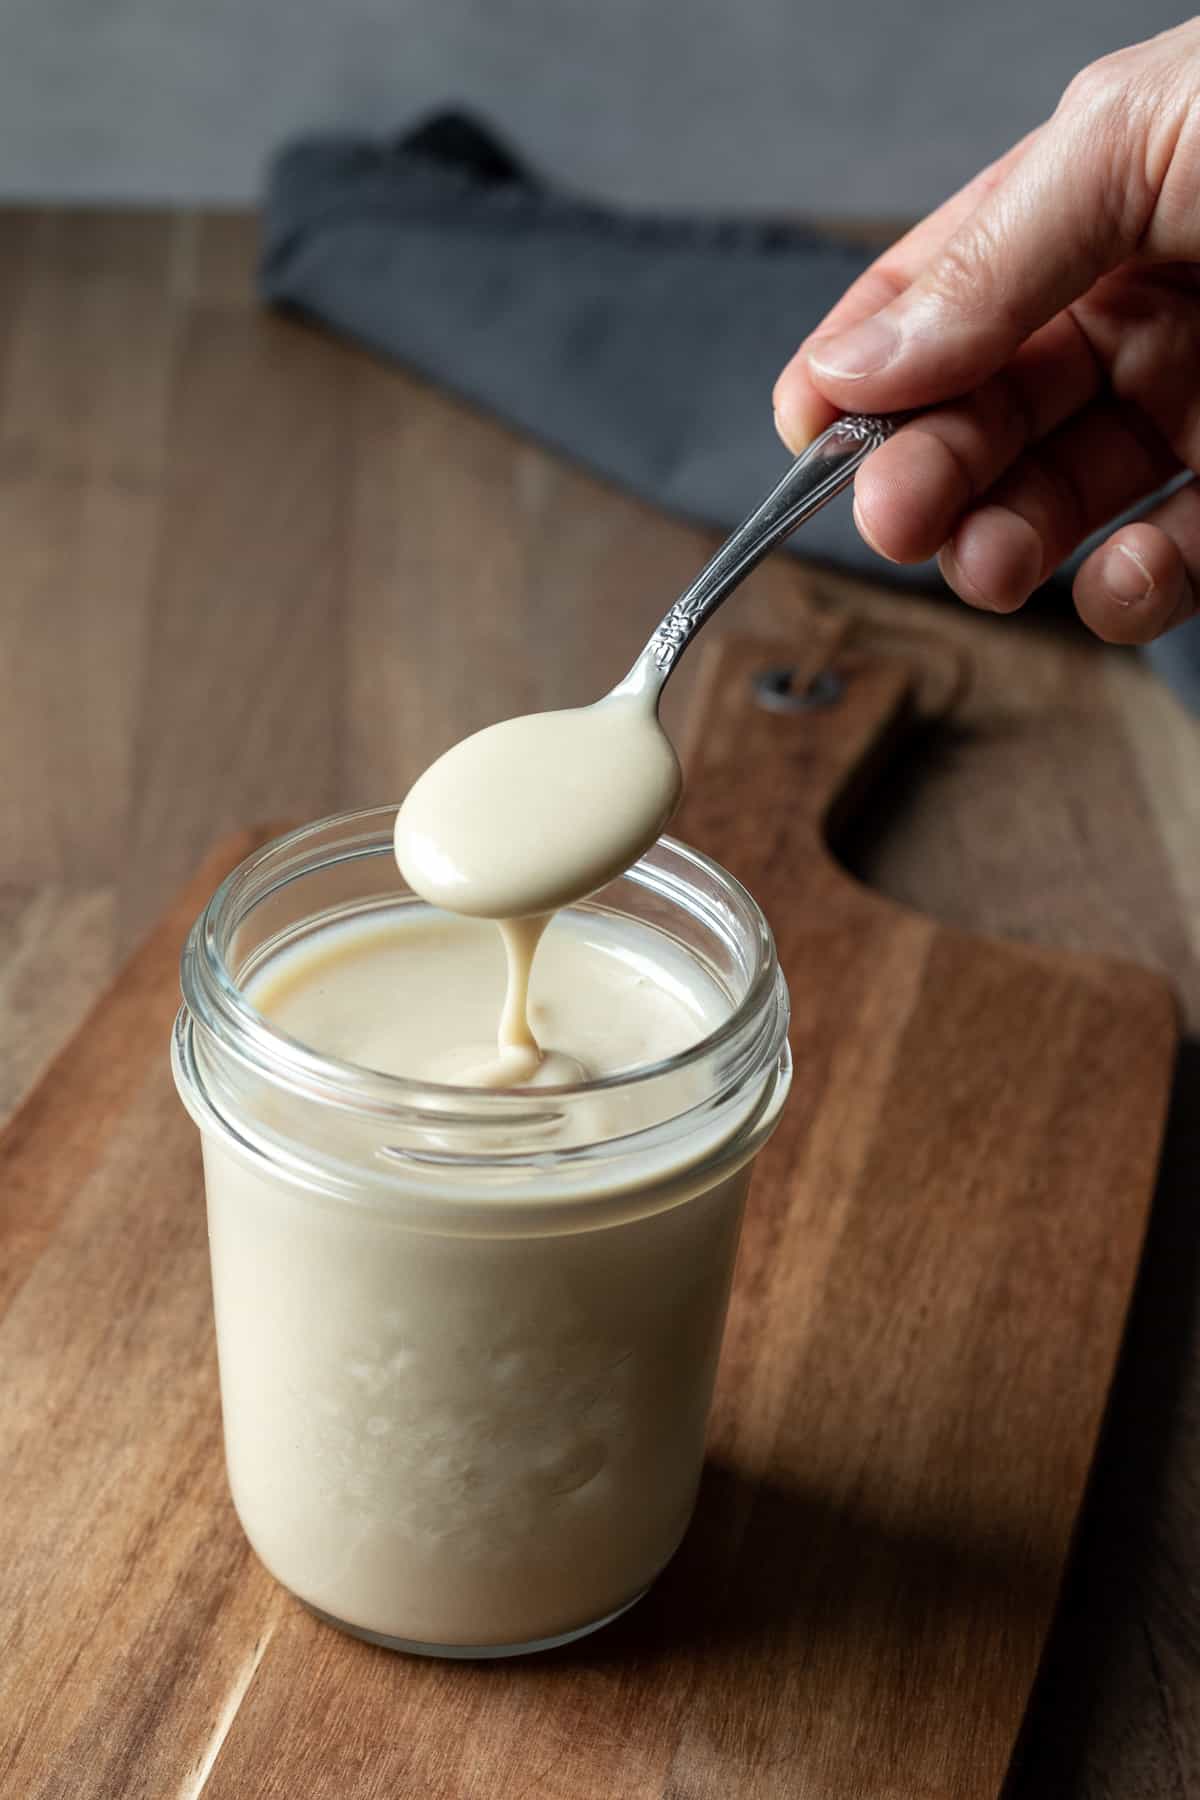 hand spooning up very thick and creamy dairy-free sweetened condensed milk from a jar.